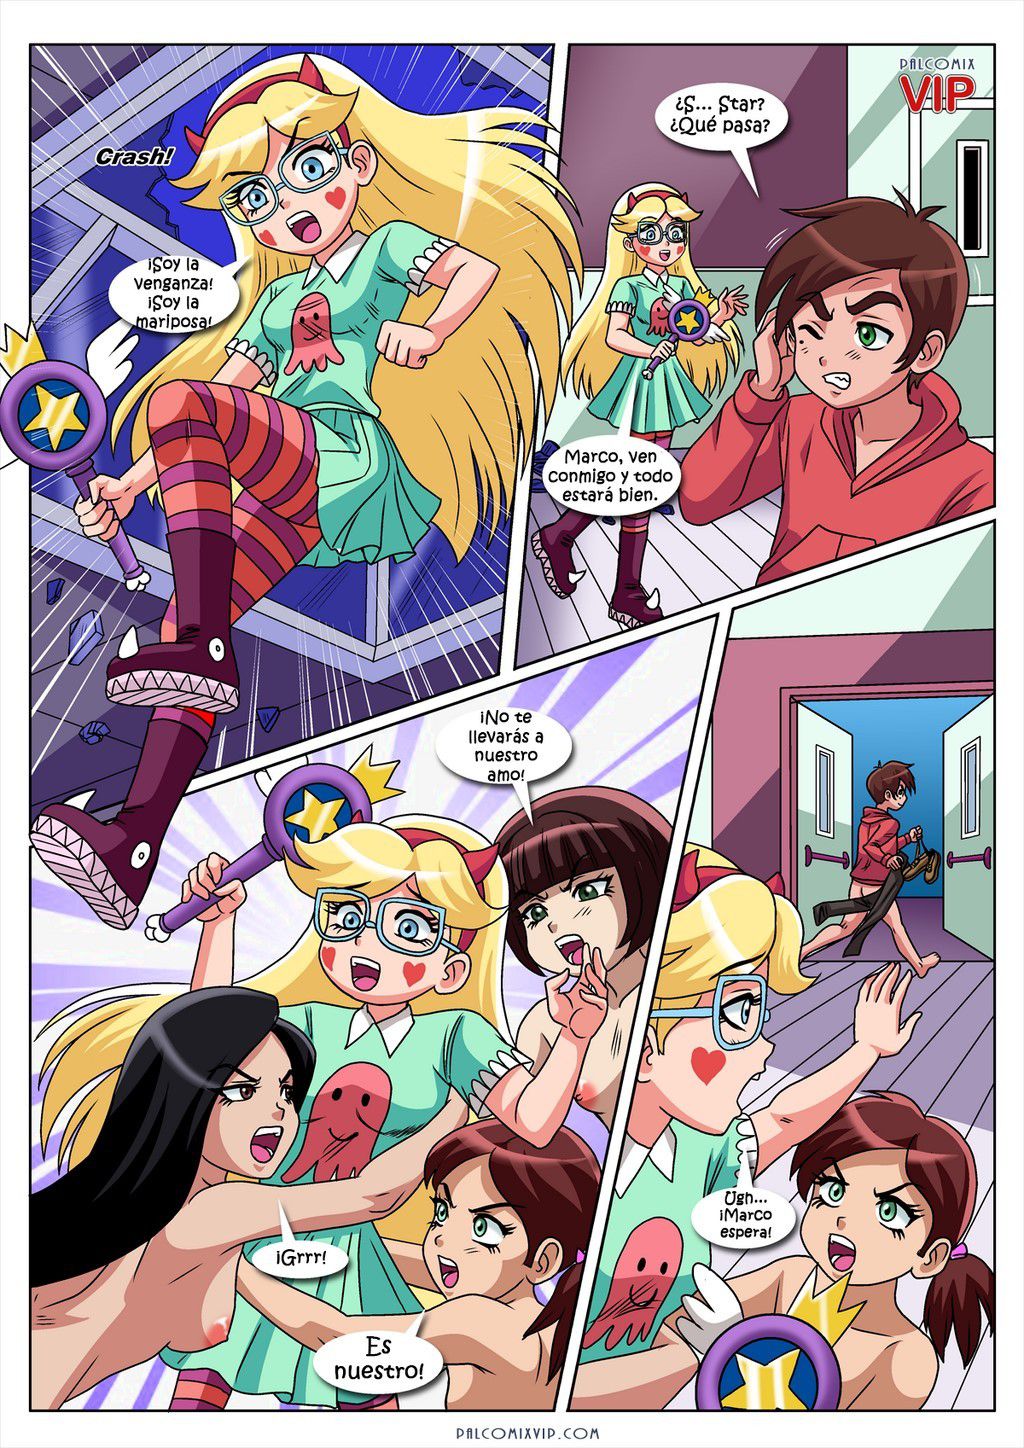 [Palcomix] Amante Latino (Star vs. the Forces of Evil) [Spanish] 12